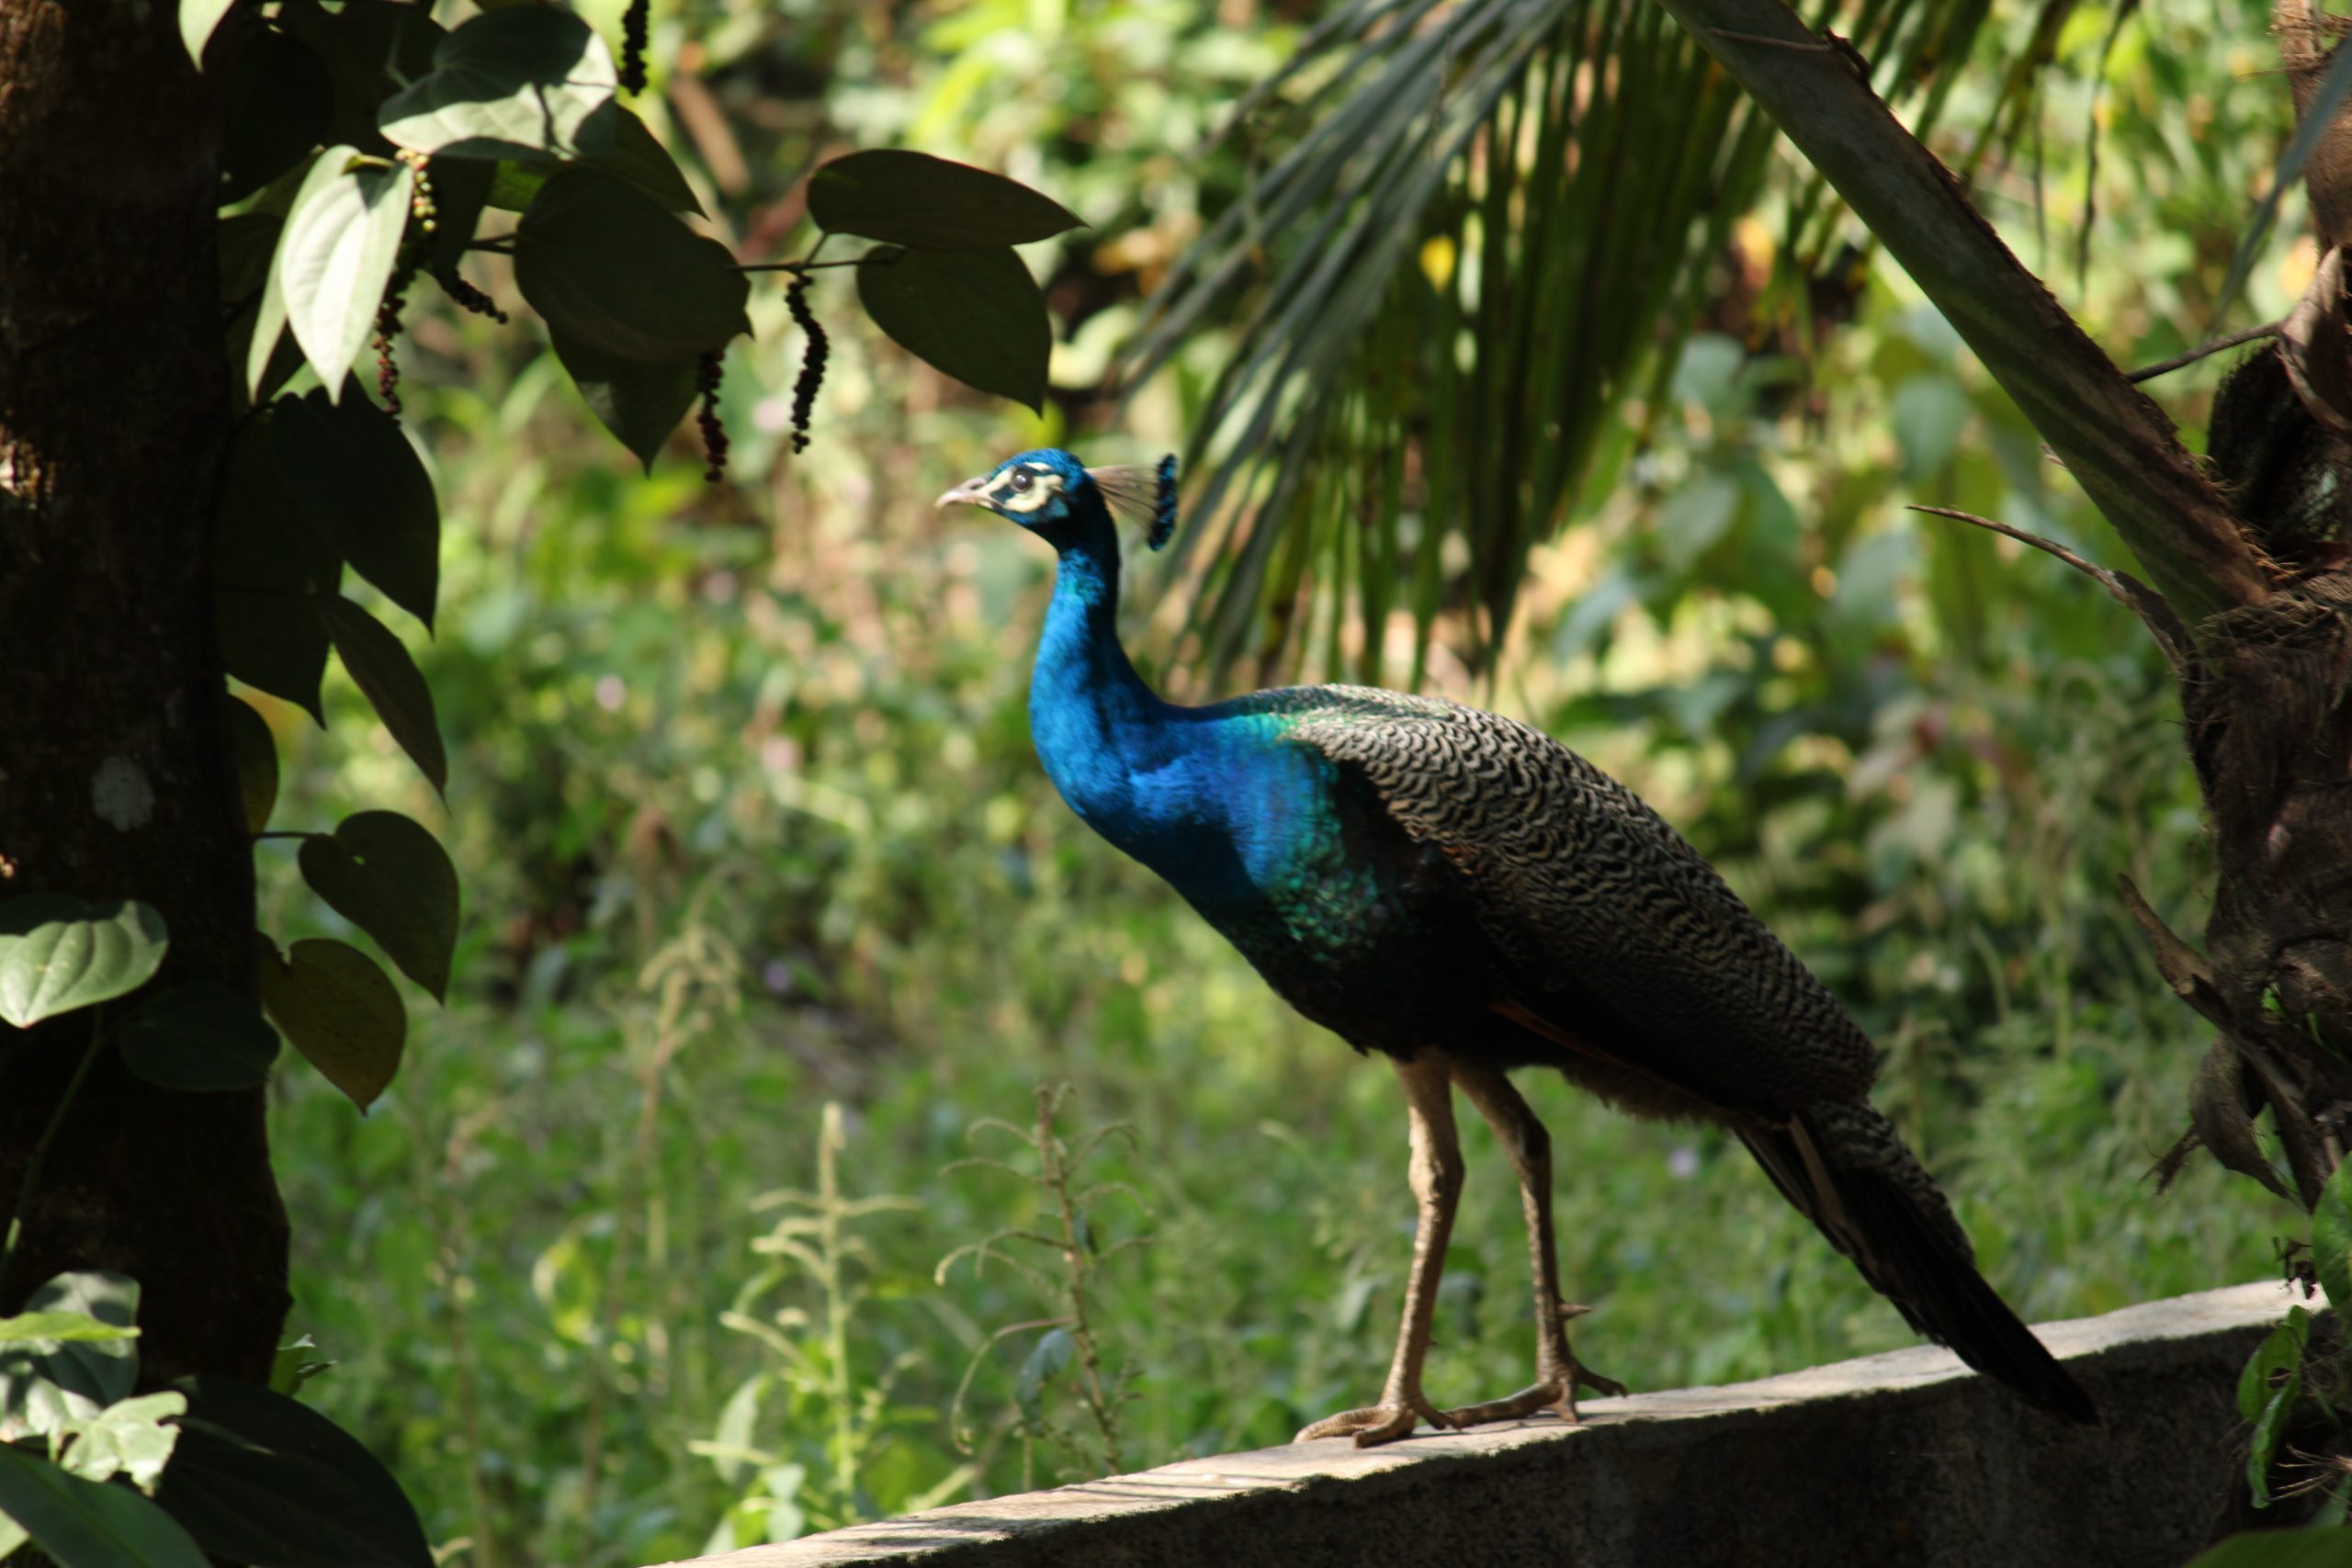 A peacock sitting on wall in forest